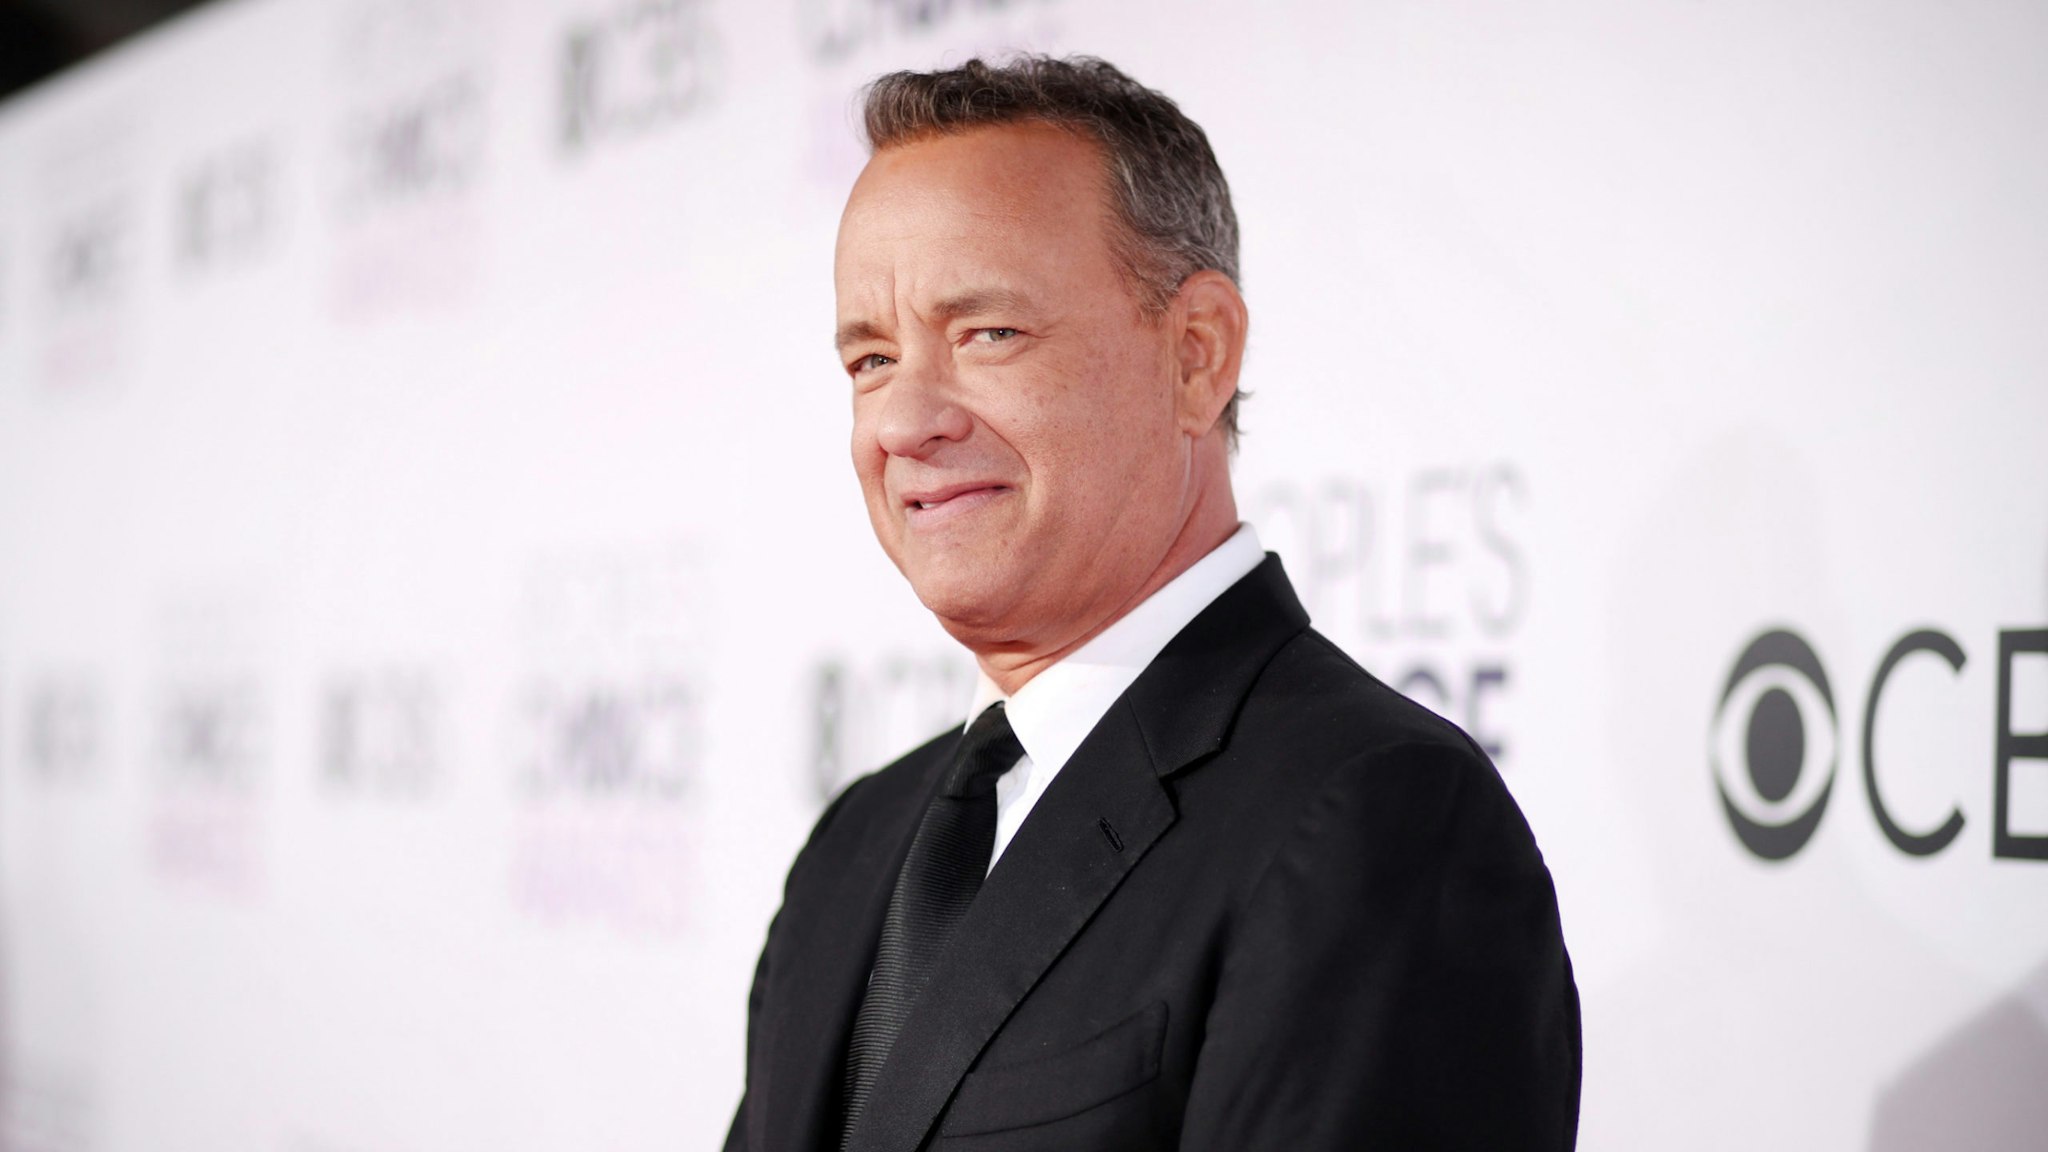 Actor Tom Hanks attends the People's Choice Awards 2017 at Microsoft Theater on January 18, 2017 in Los Angeles, California.